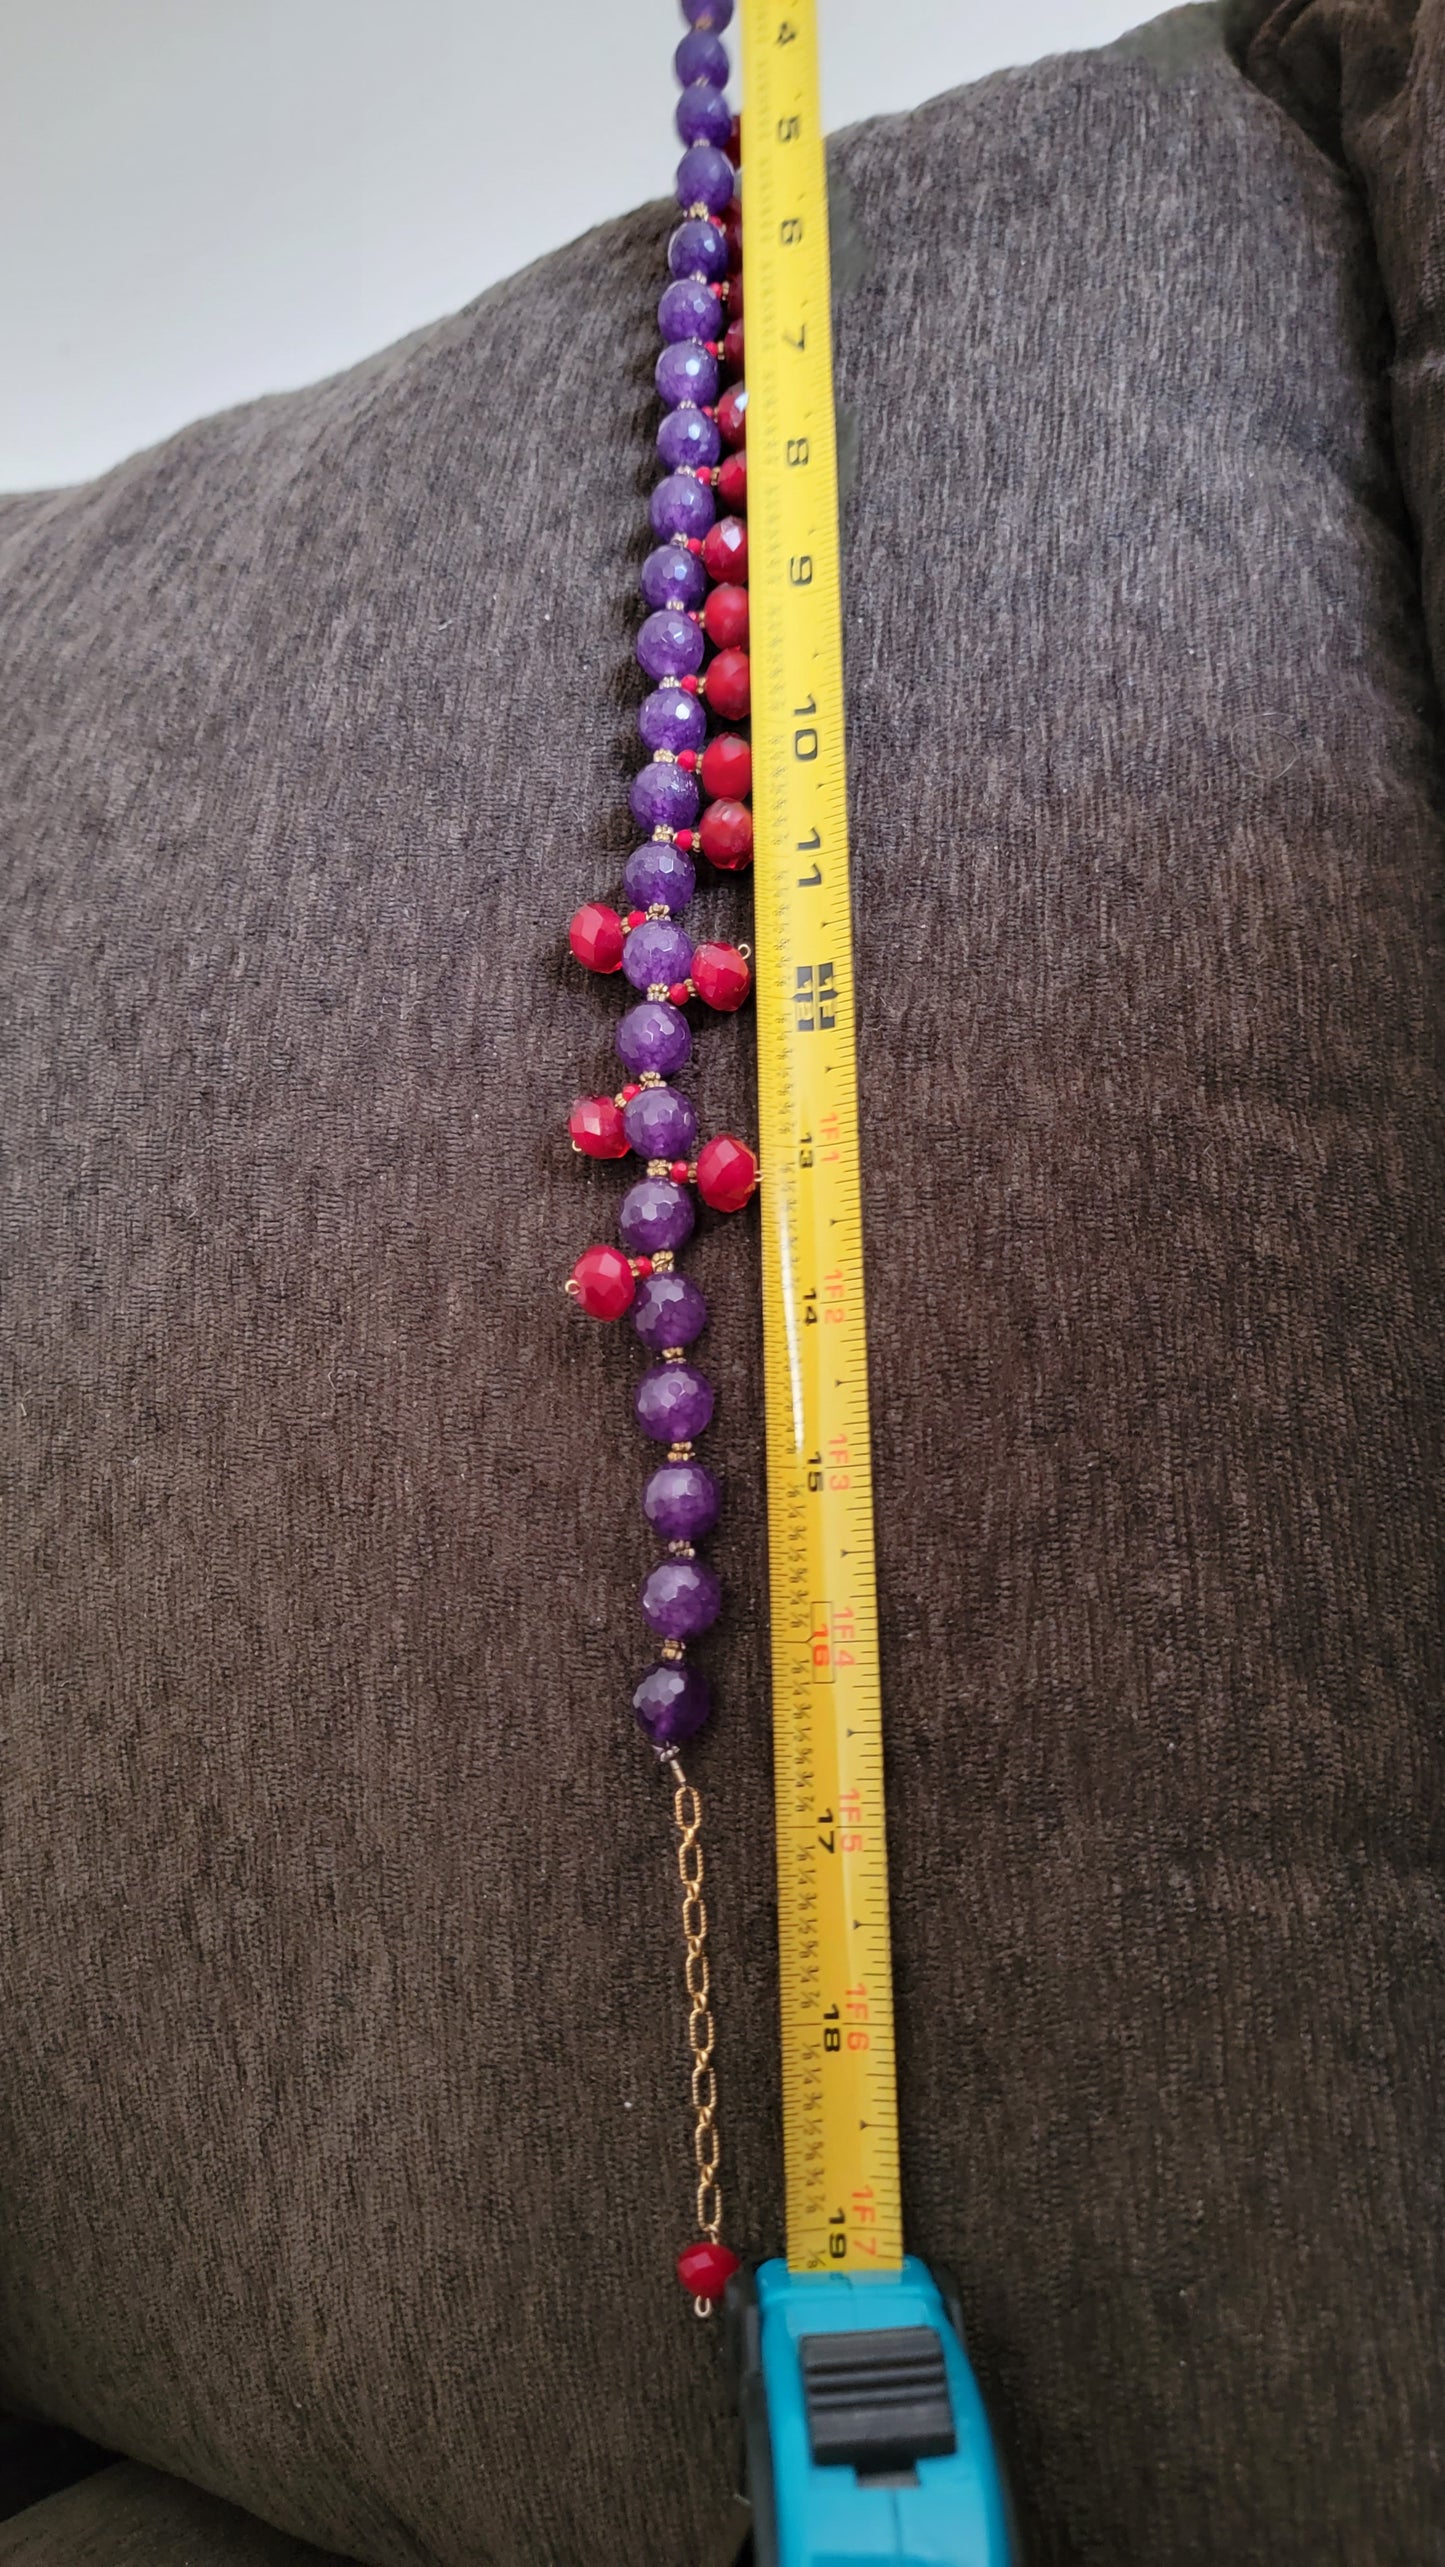 Beaded Garnet and Amethyst Colored Necklace Jeweled